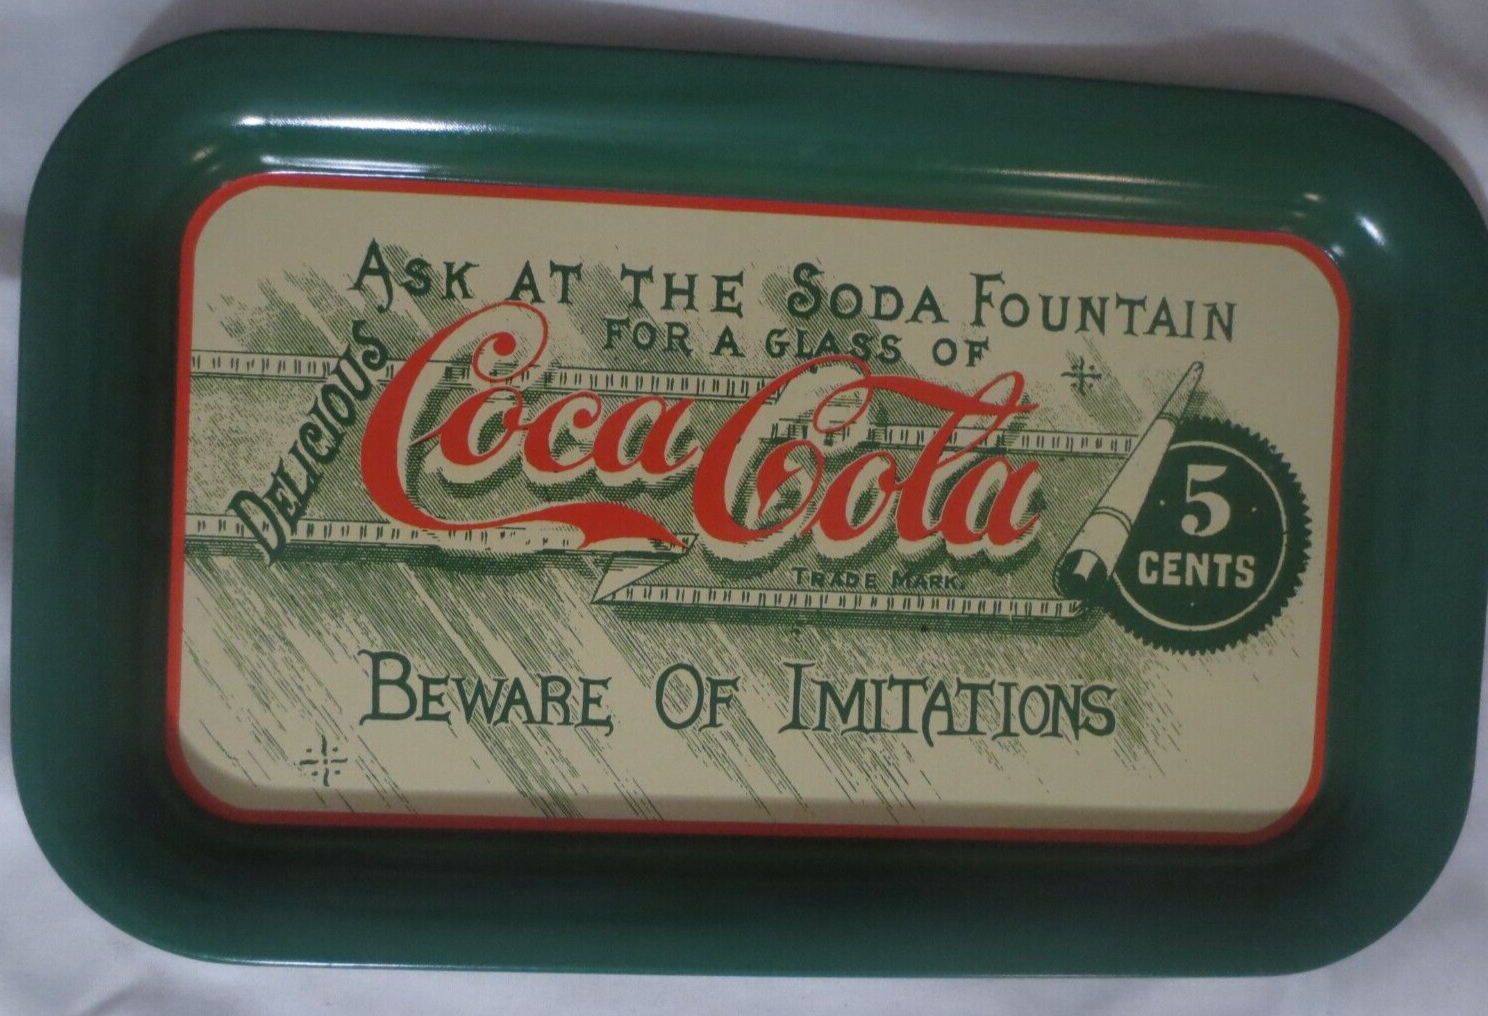 Primary image for Coca-Cola Metal Tray  Ask at the Soda Fountain  1992 small rectangular